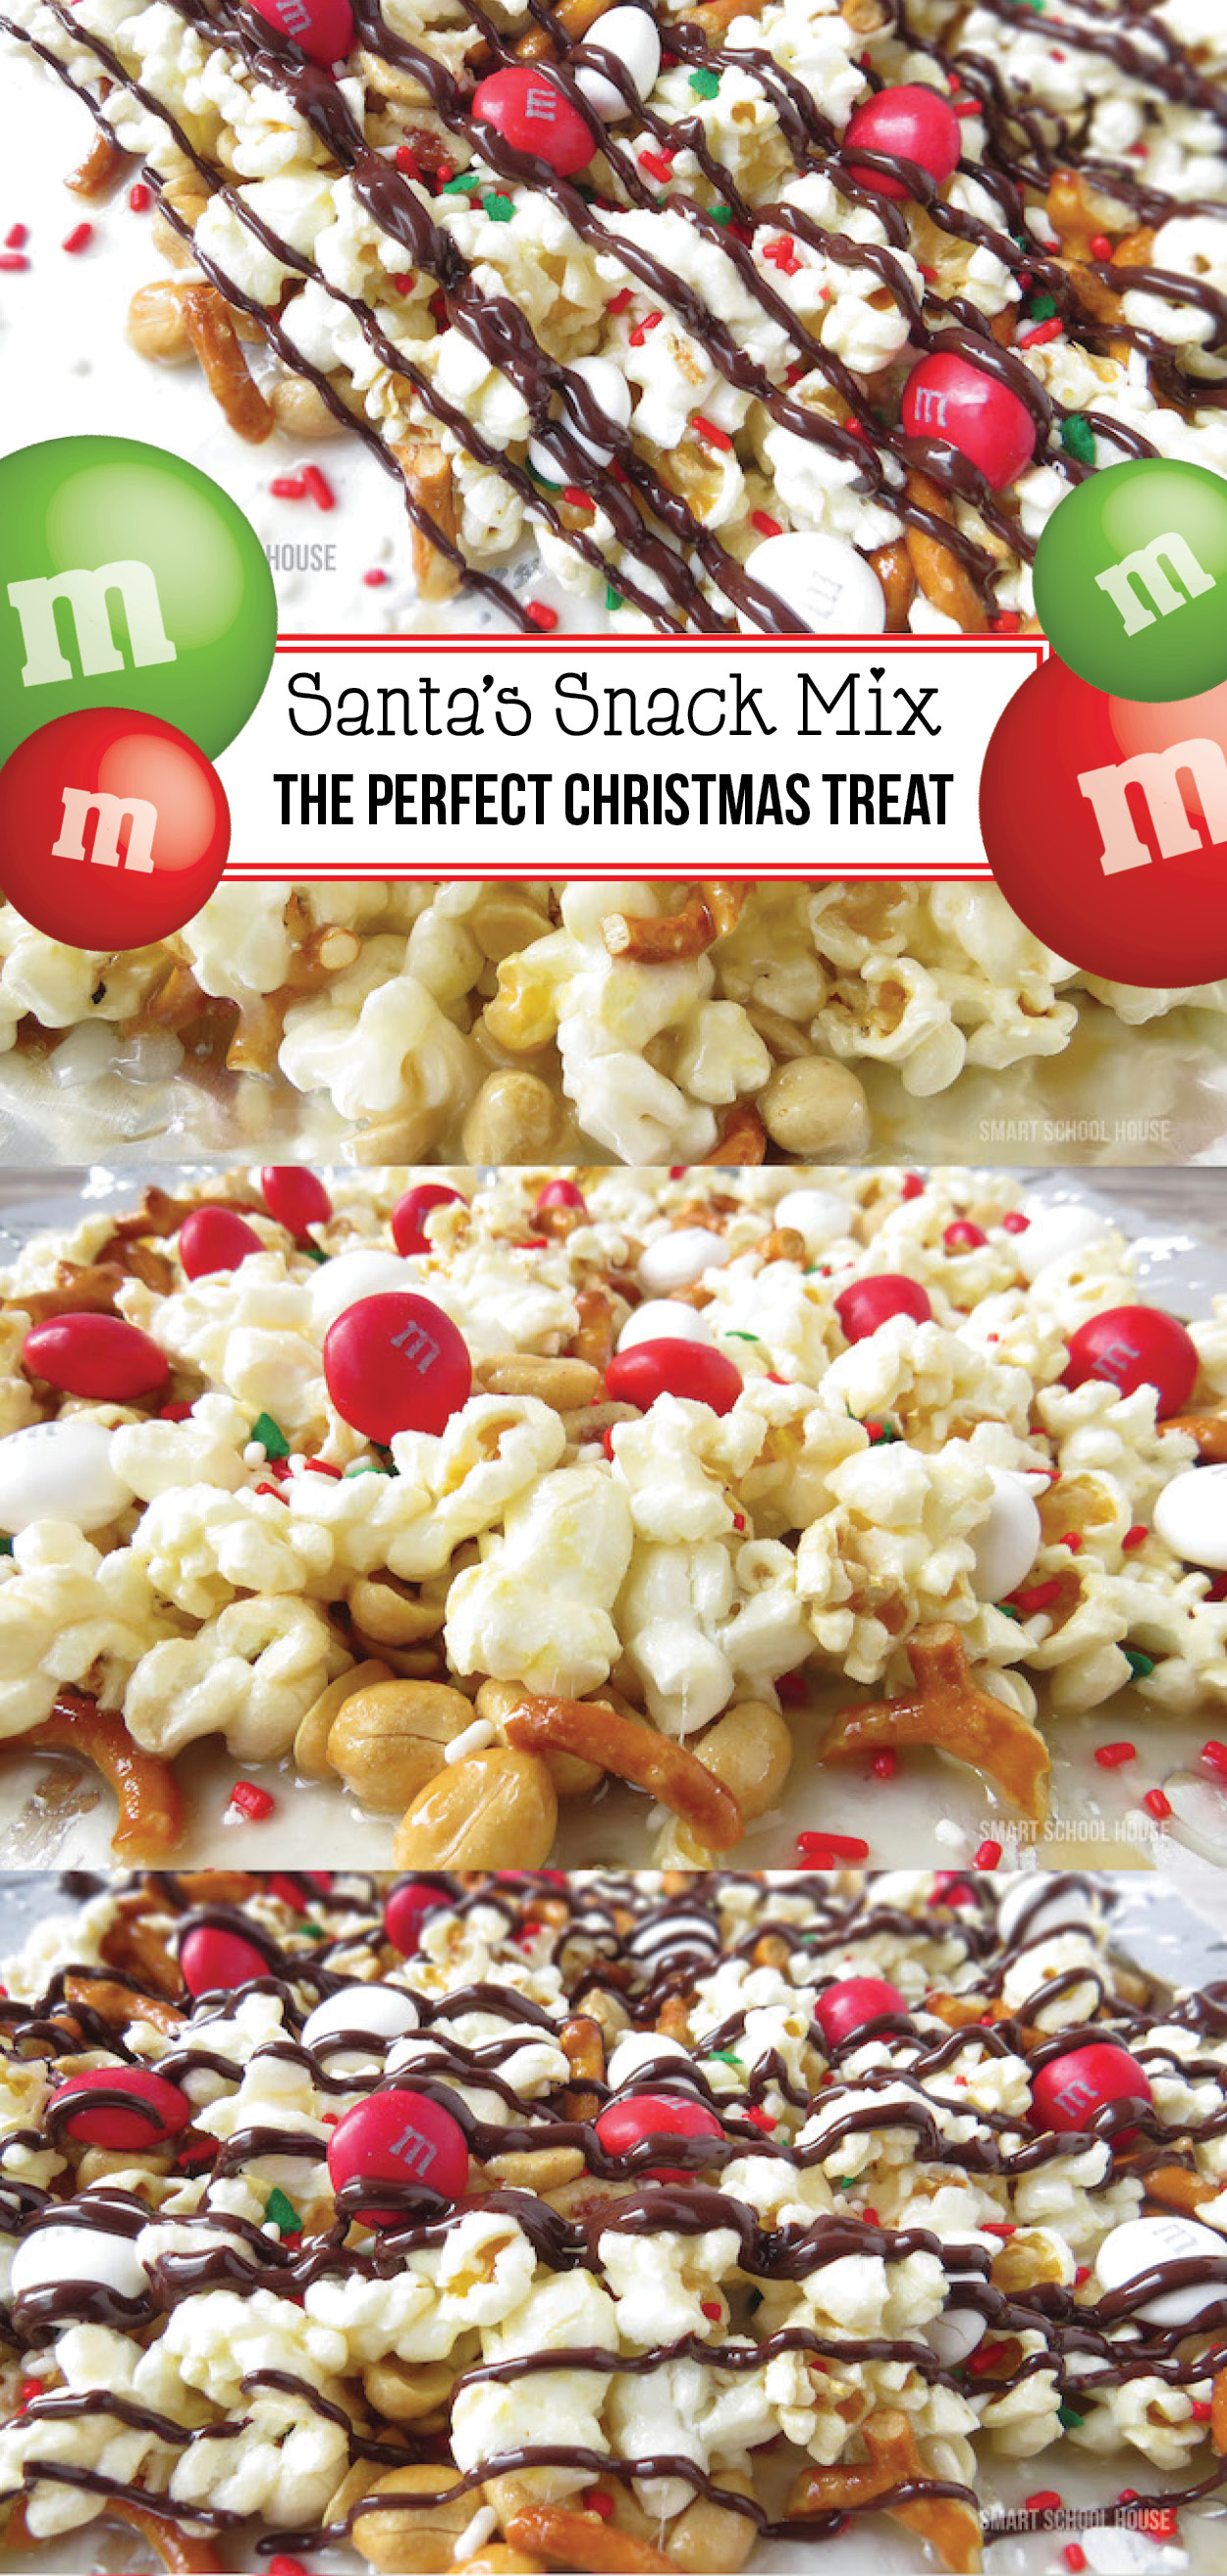 Santa's snack mix is an easy popcorn mix that is the perfect Christmas treat! Popcorn, pretzels, and nuts, coated with chocolate and mixed with M&Ms making the perfect sweet treat for parties or packaged for goody bags.